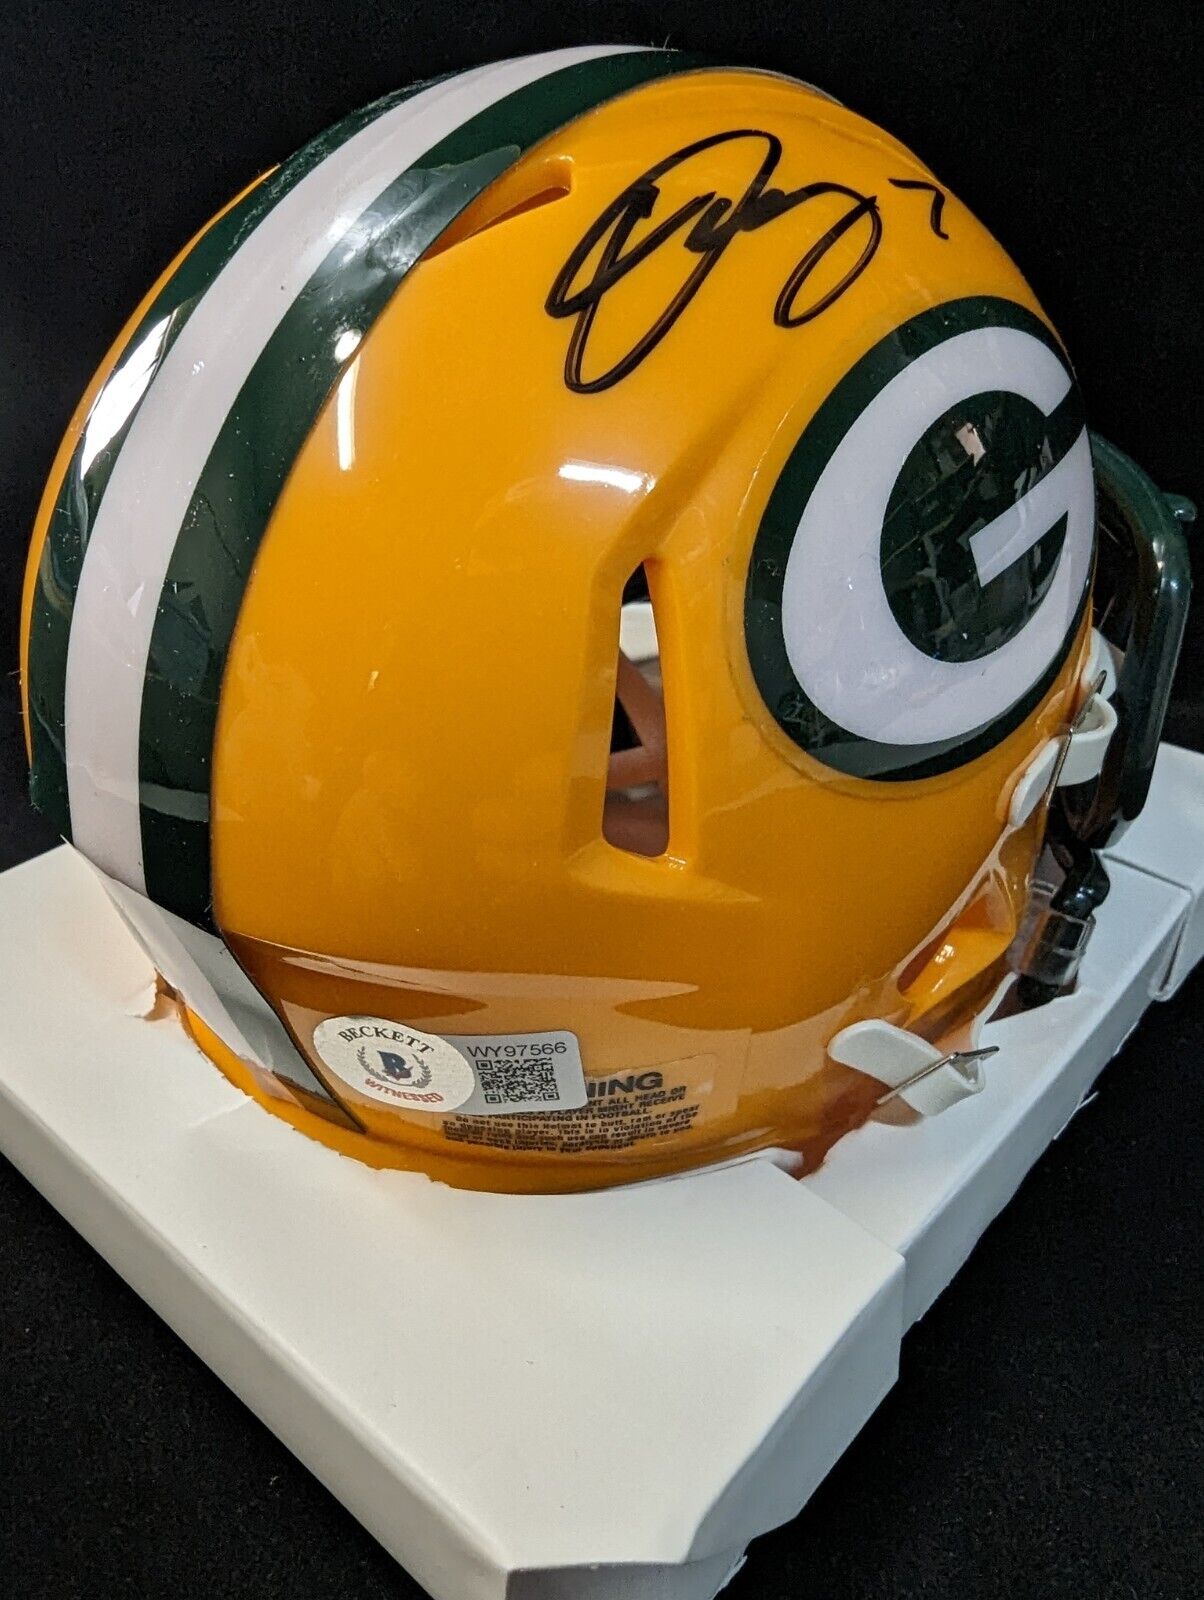 MVP Authentics Green Bay Packers Quay Walker Autographed Signed Speed Mini Helmet Beckett Holo 81 sports jersey framing , jersey framing